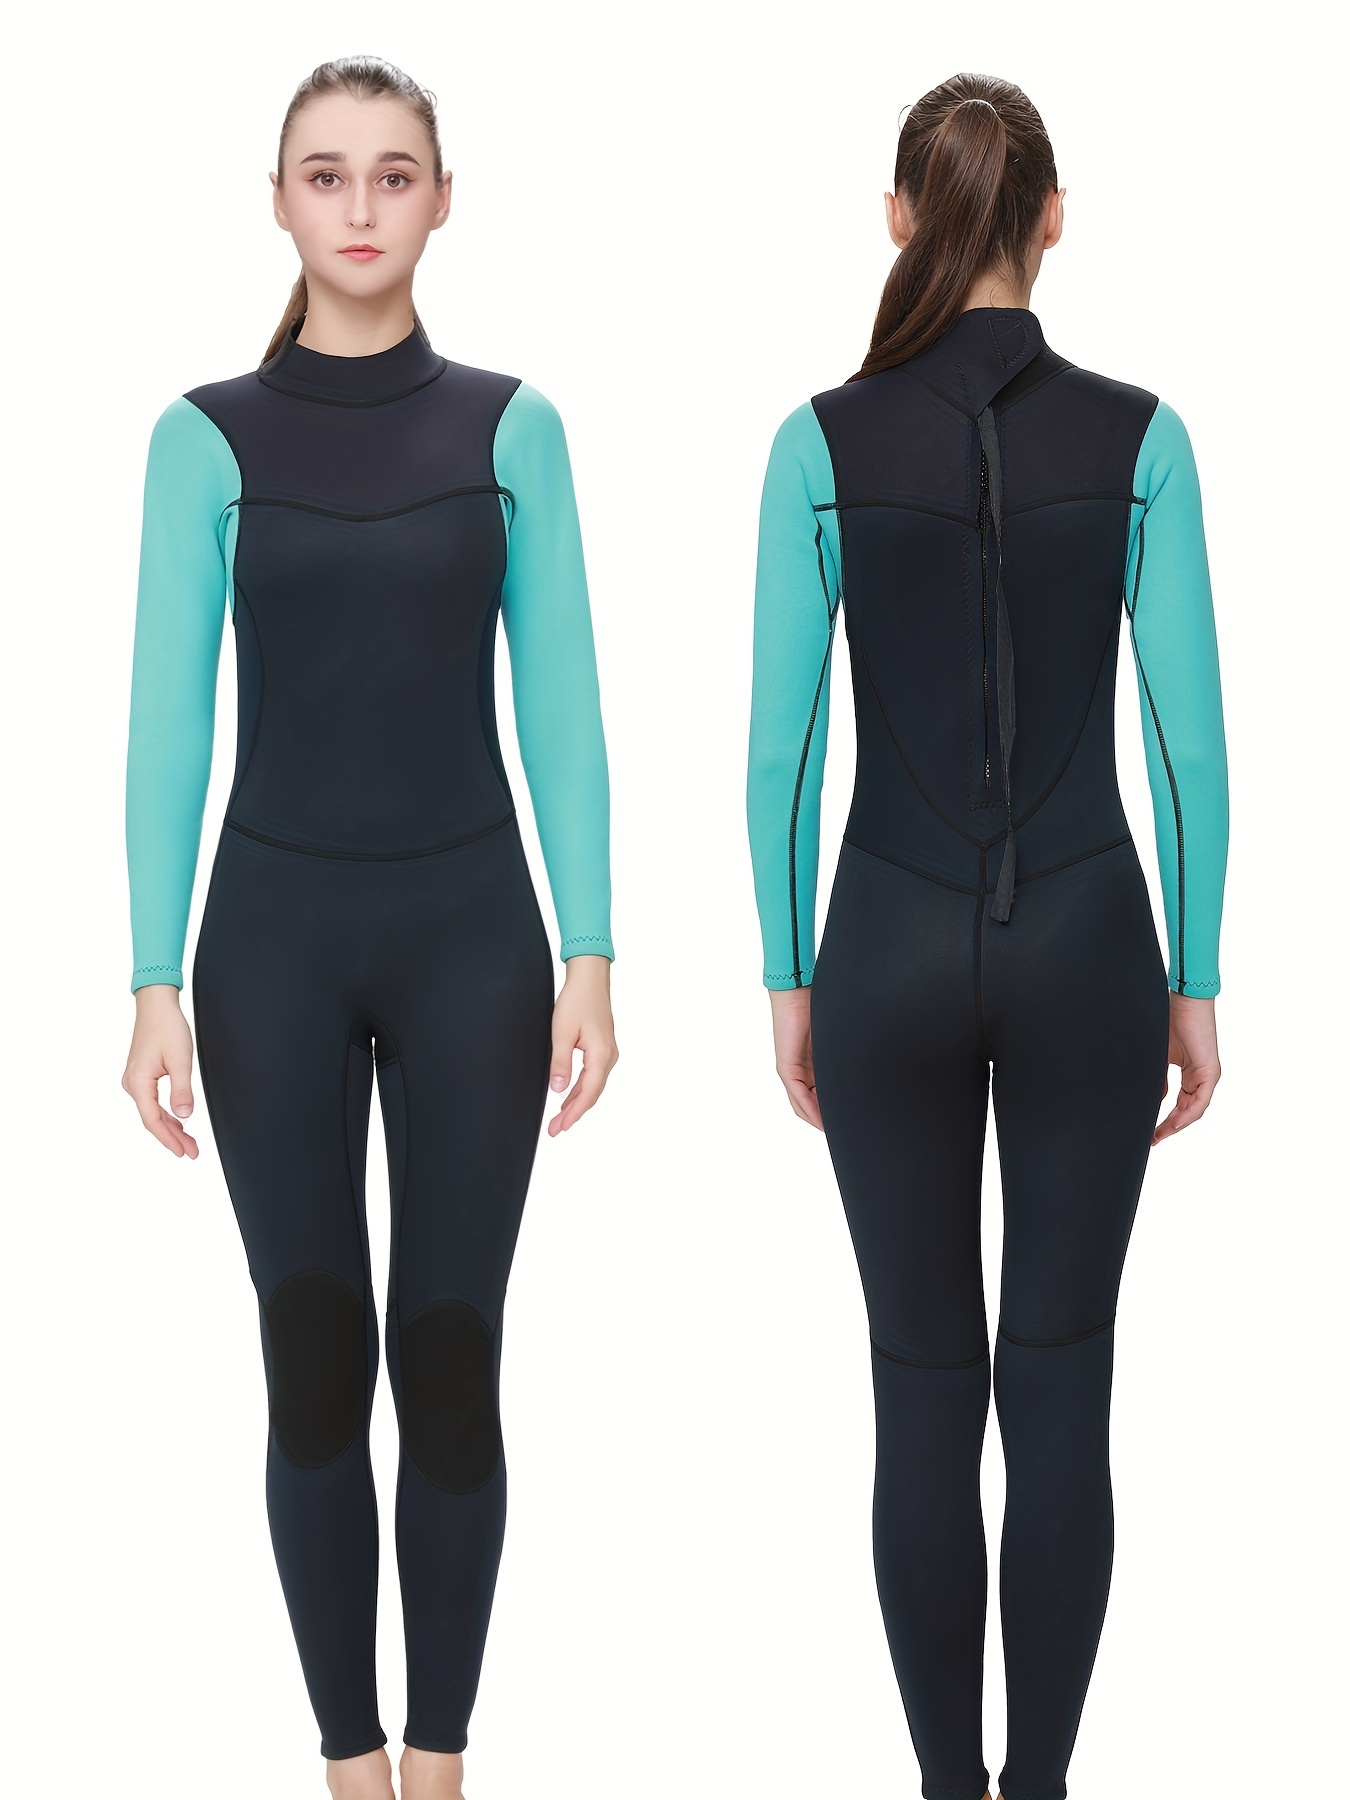 Wholesale realon wetsuit For Underwater Thermal Protection